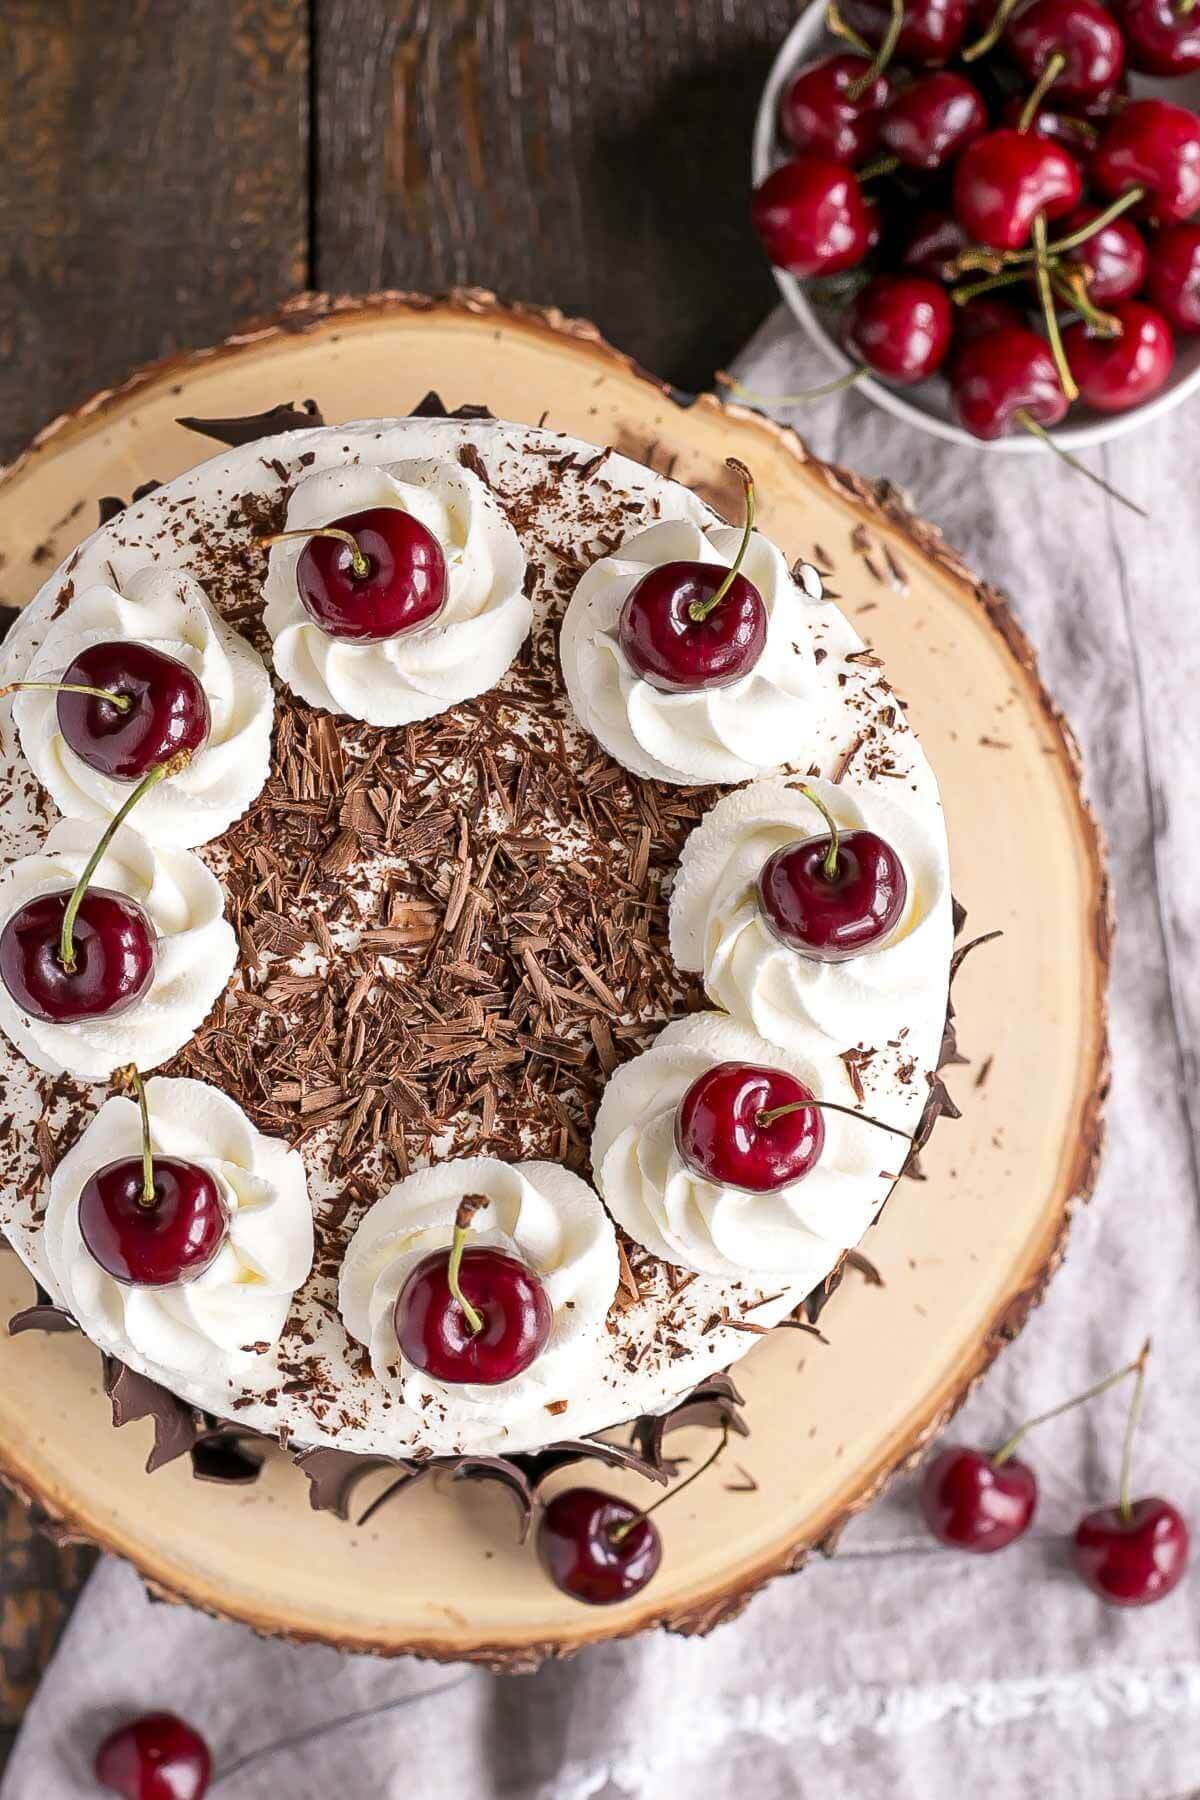 How to make Black Forest cake at home